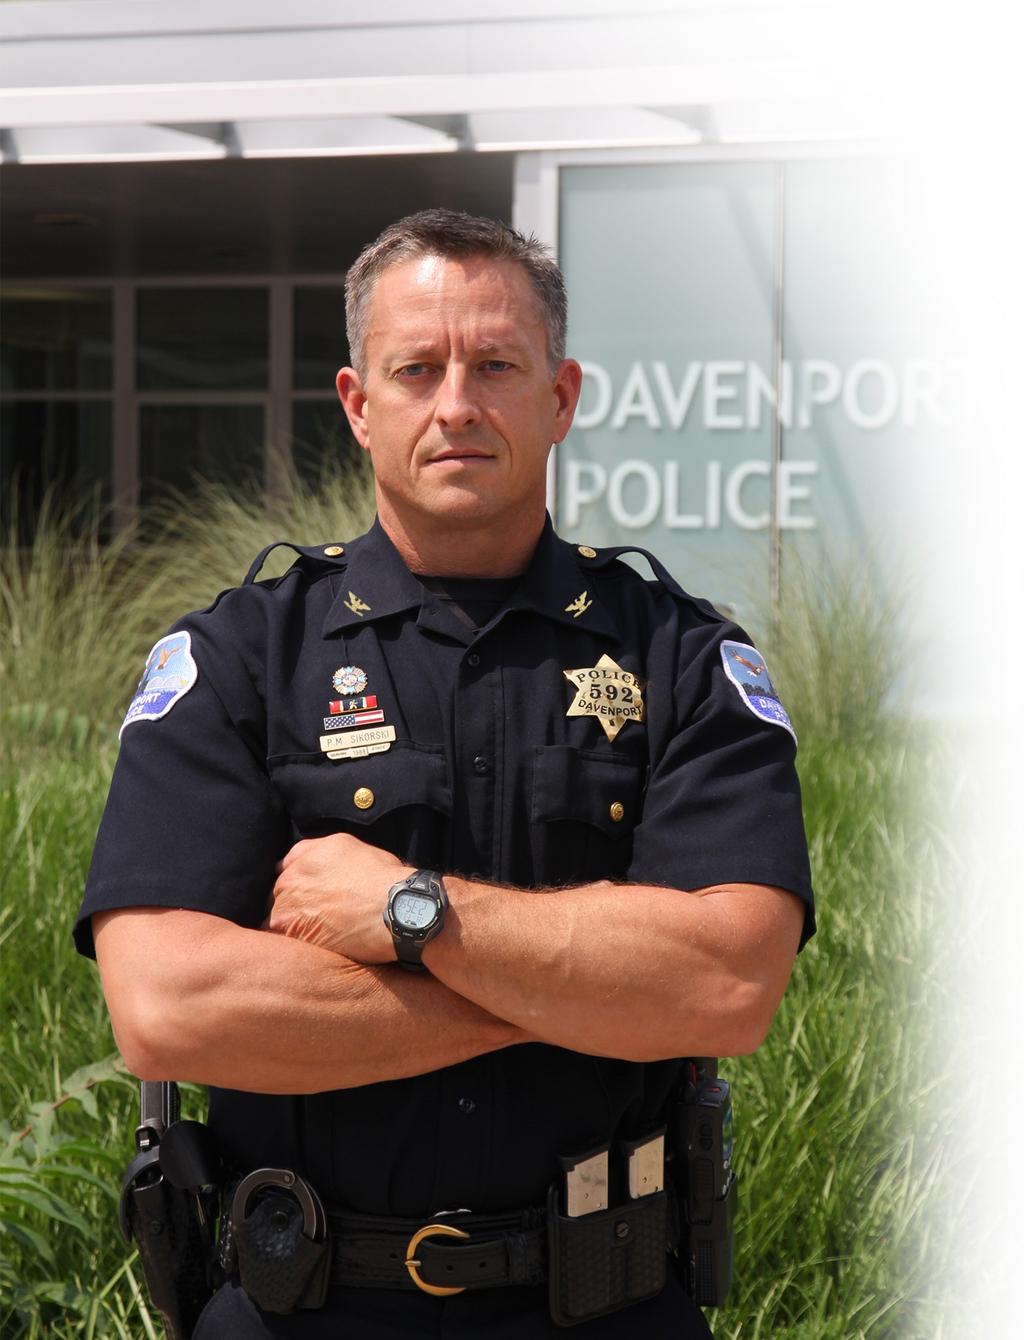 MESSAGE FROM THE CHIEF The Davenport Police Department is pleased to present our 2015 Annual Report.